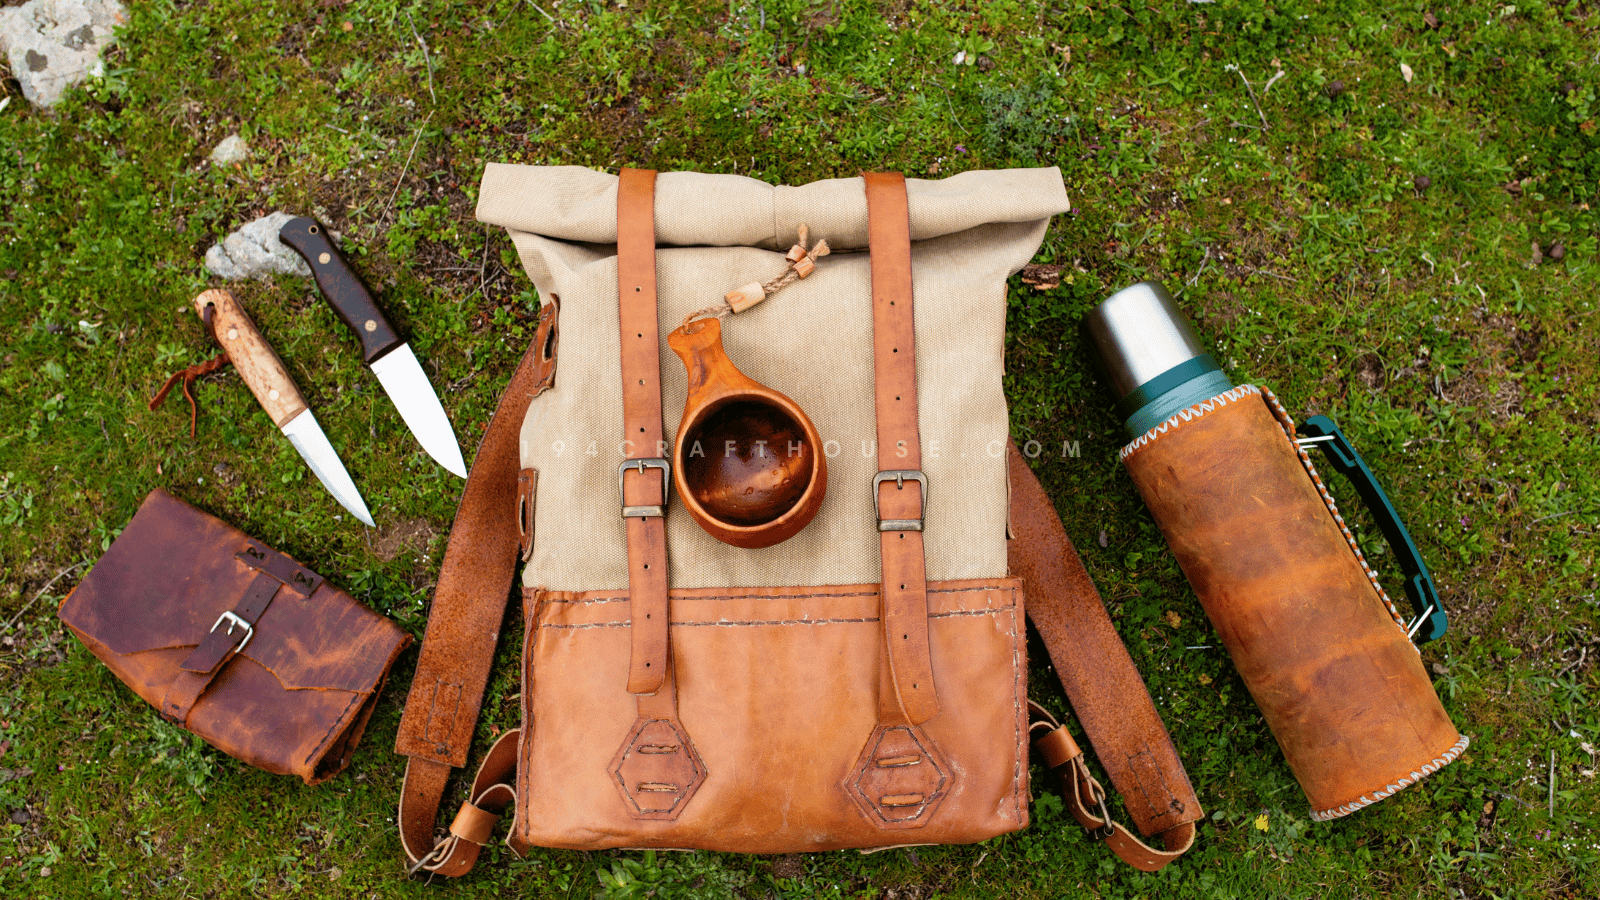 The Kuksa mug is a favorite among outdoor enthusiasts, including hikers, campers, and bushcrafters